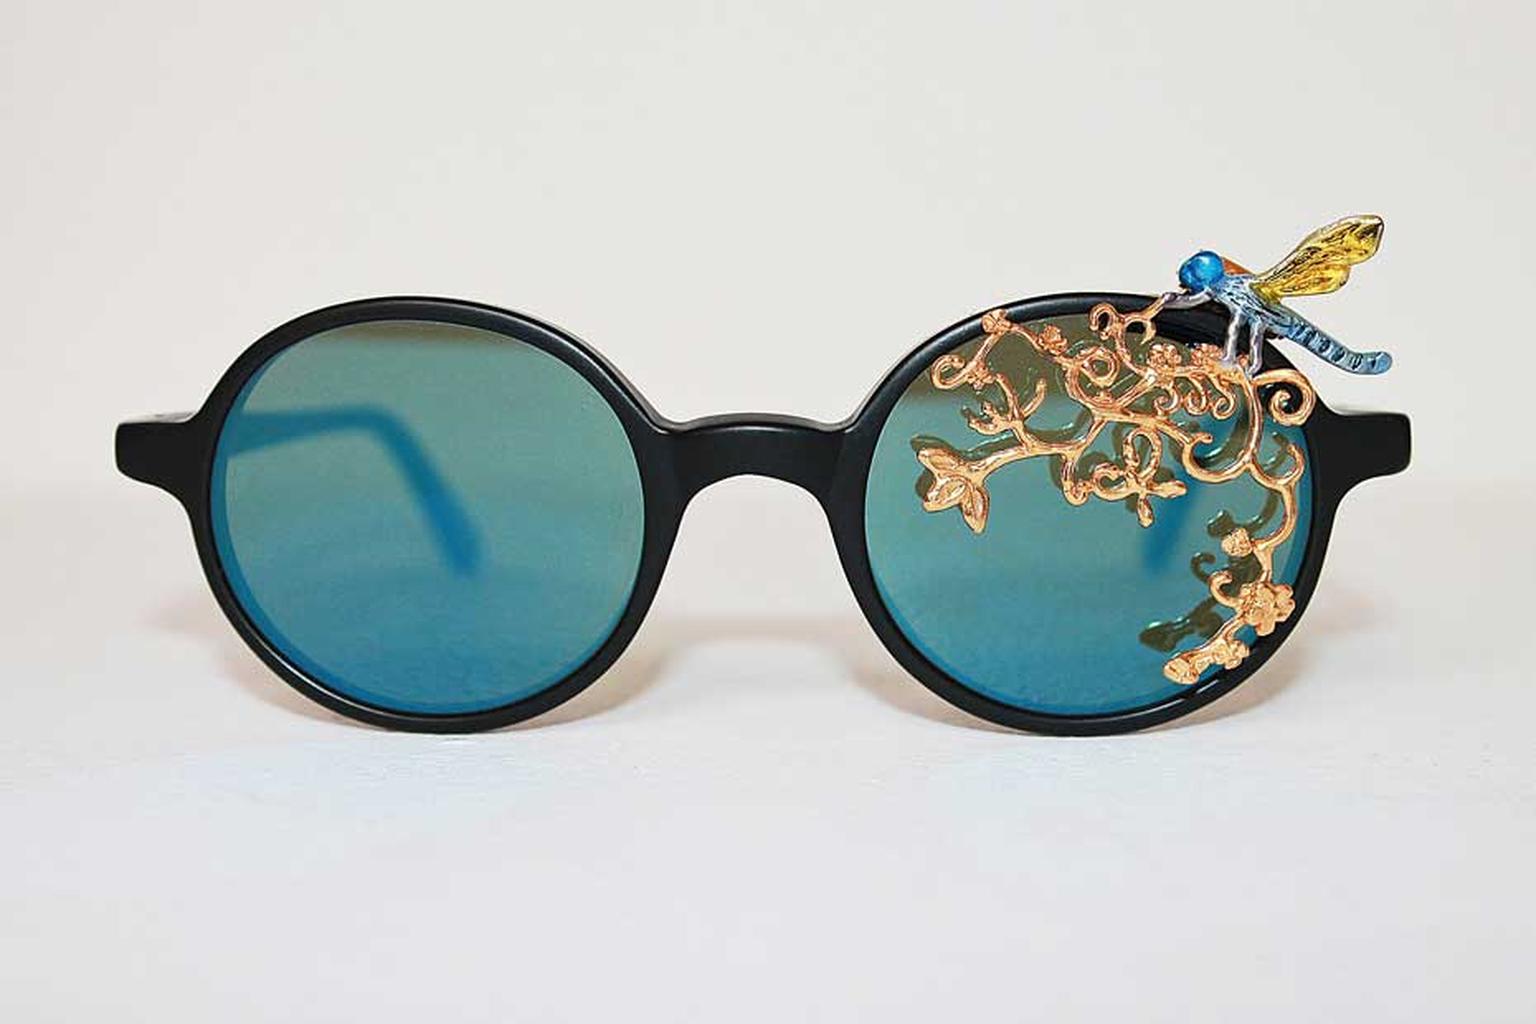 Maskhara with Dragonfly sunglasses in gold-plated silver and enamel, available in a signed and numbered limited edition of 25, created by Iranian artist Avish Khebrehzadeh for L.G.R.